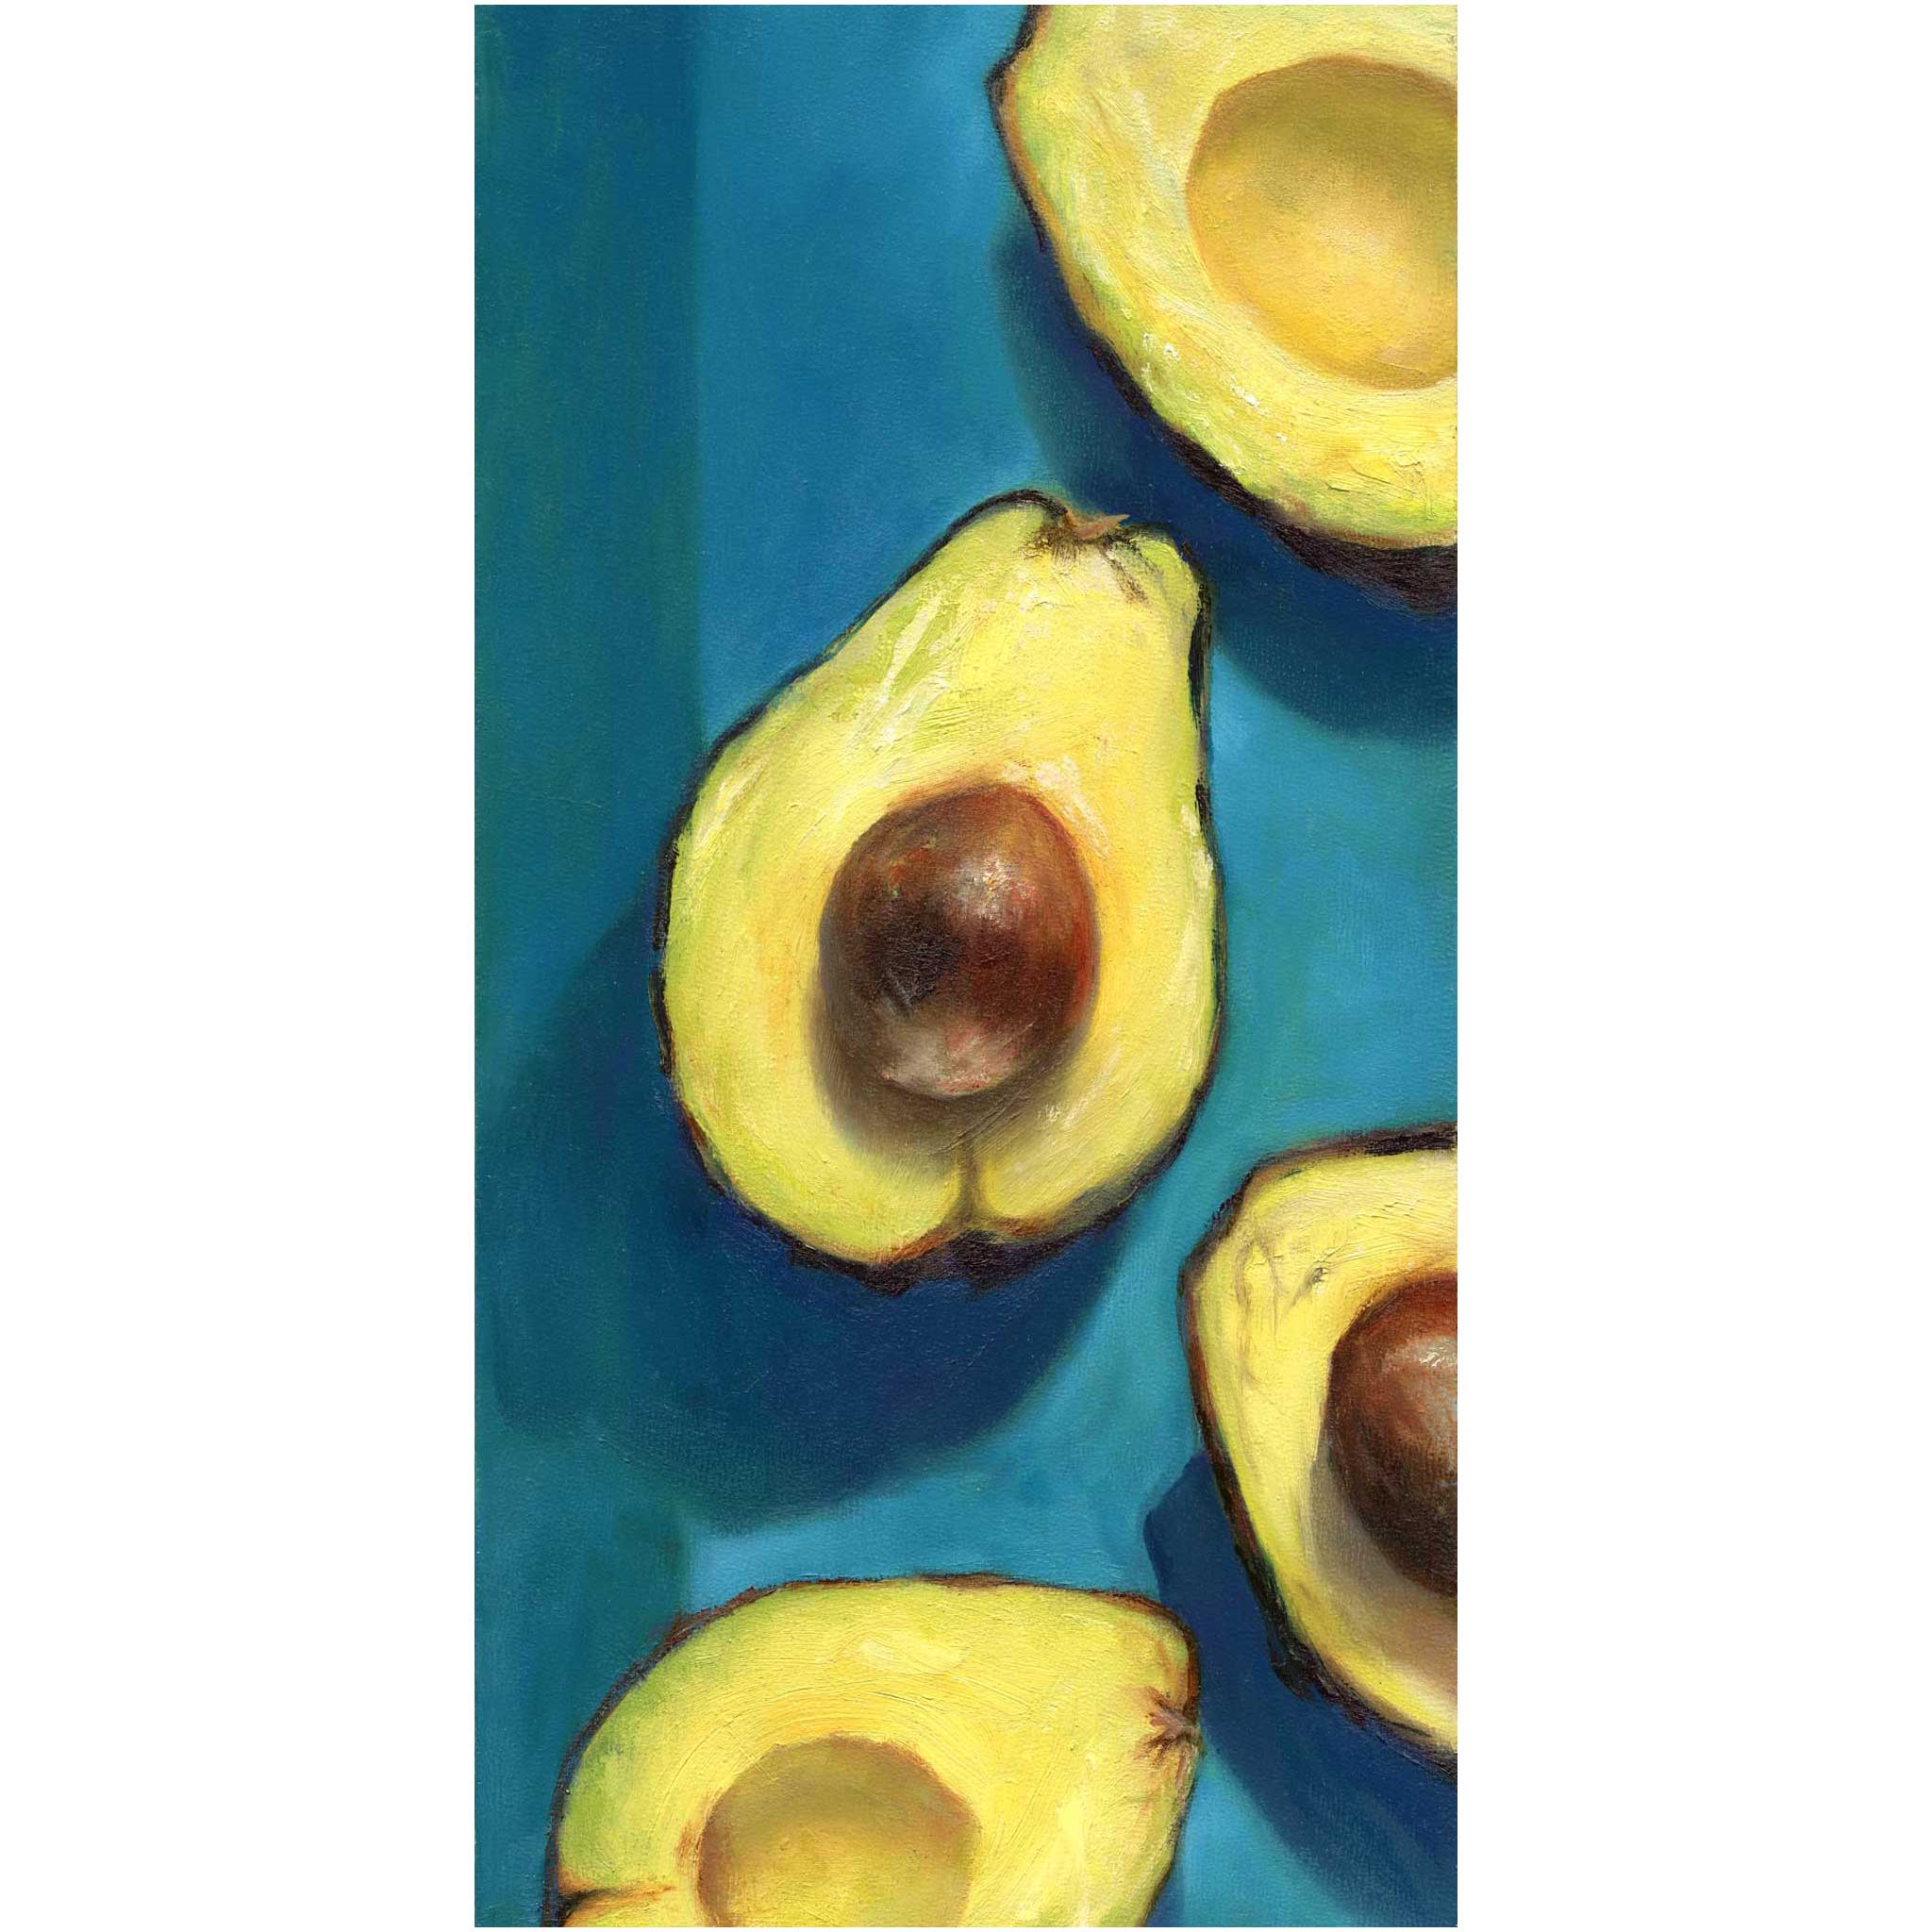 halves of yellow avocado dance across a dark turquoise blue green background. This is a giclee art print of my vegetable still life oil painting by artist Jo Bradney